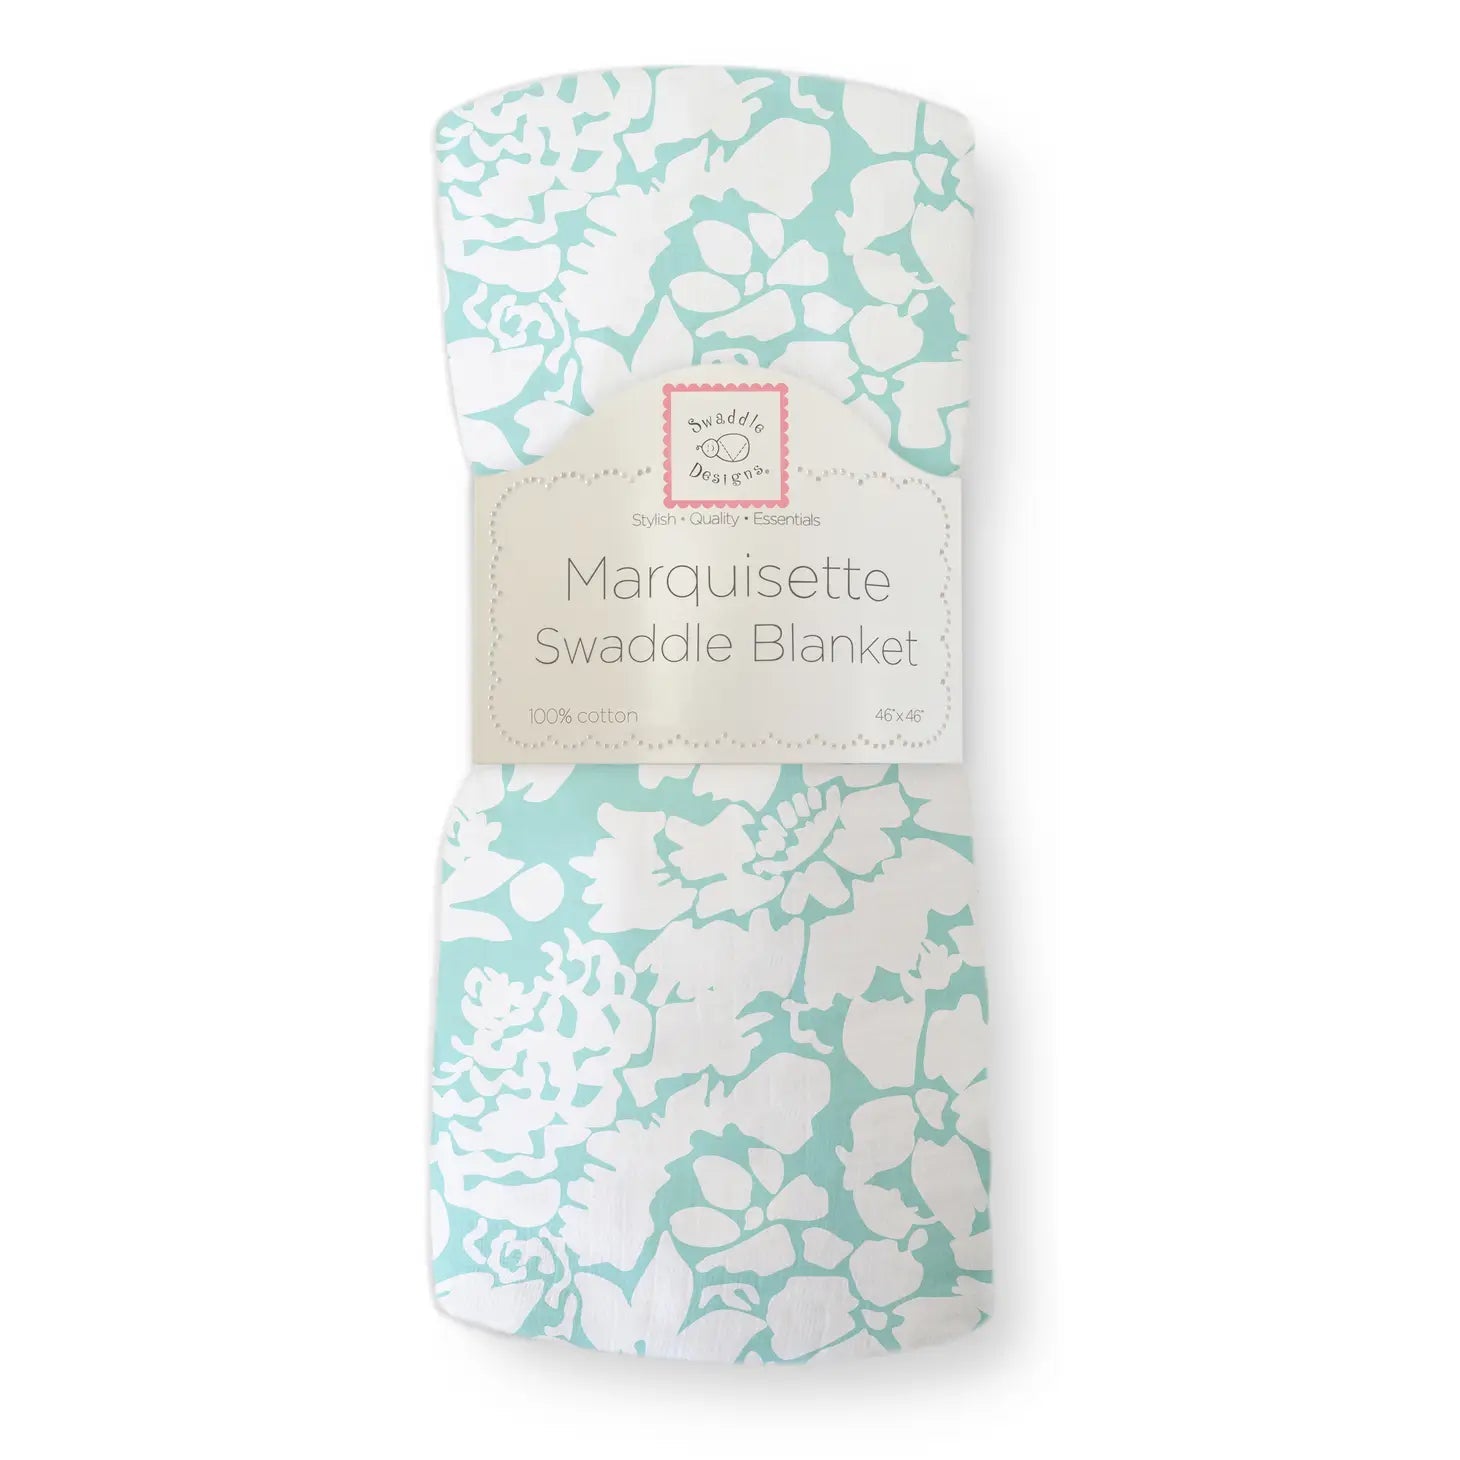 marquisette swaddle blanket in a teal with white flower pattern